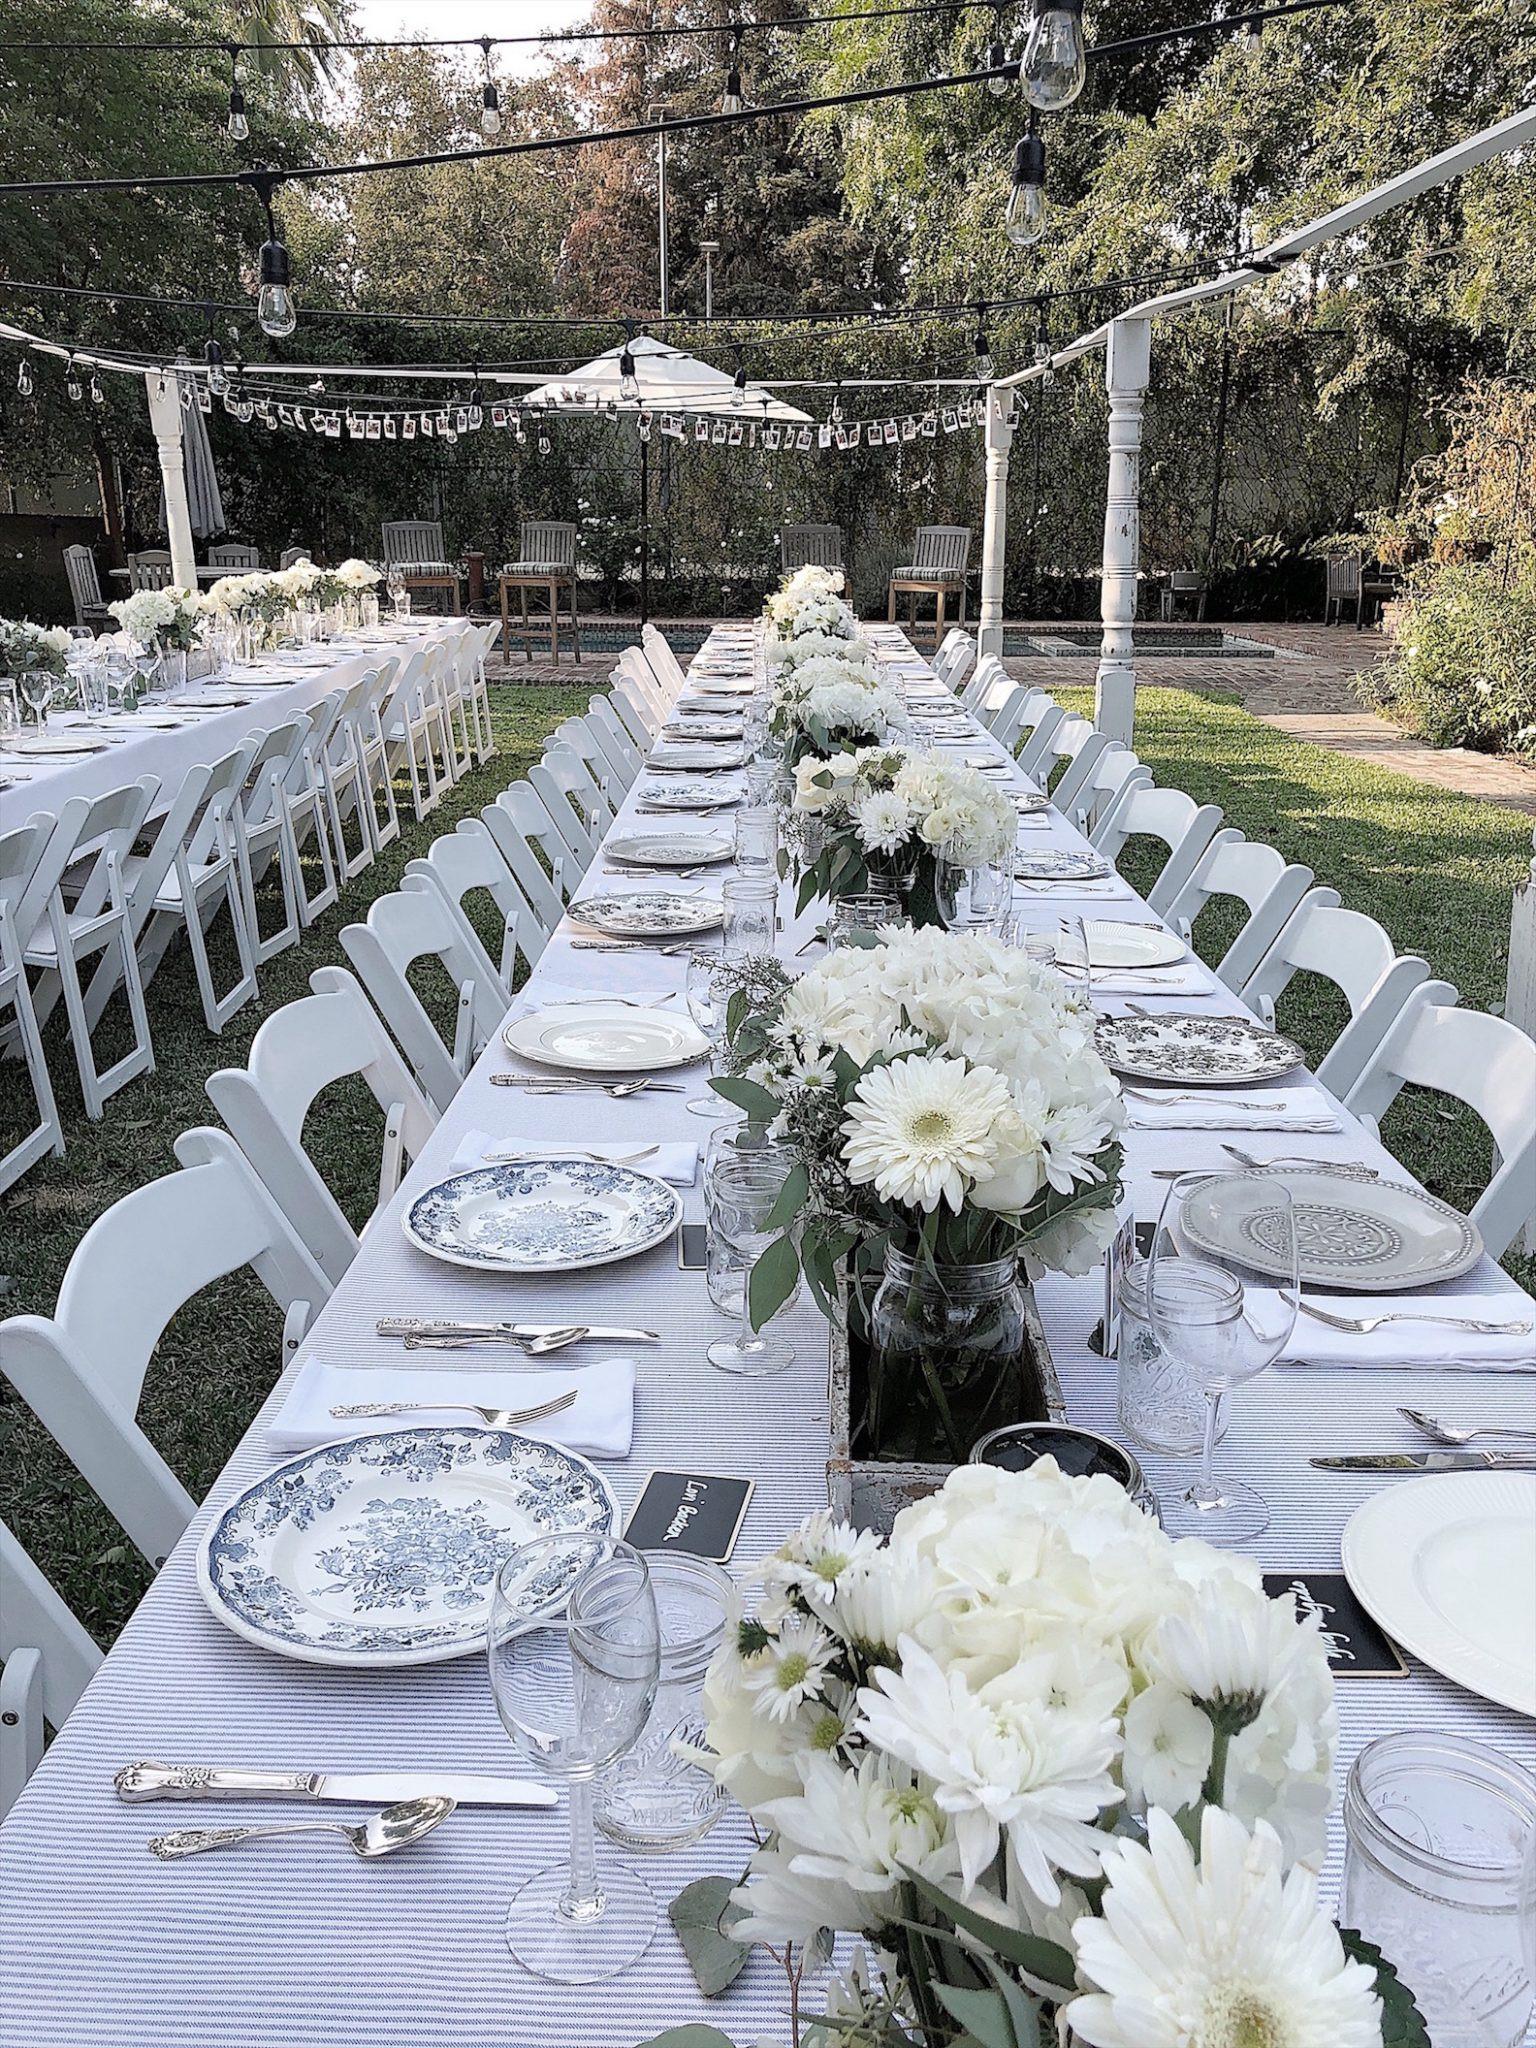 Ideas To Decorate Backyard For Engagement Party
 Adding decor to the outdoor dining room